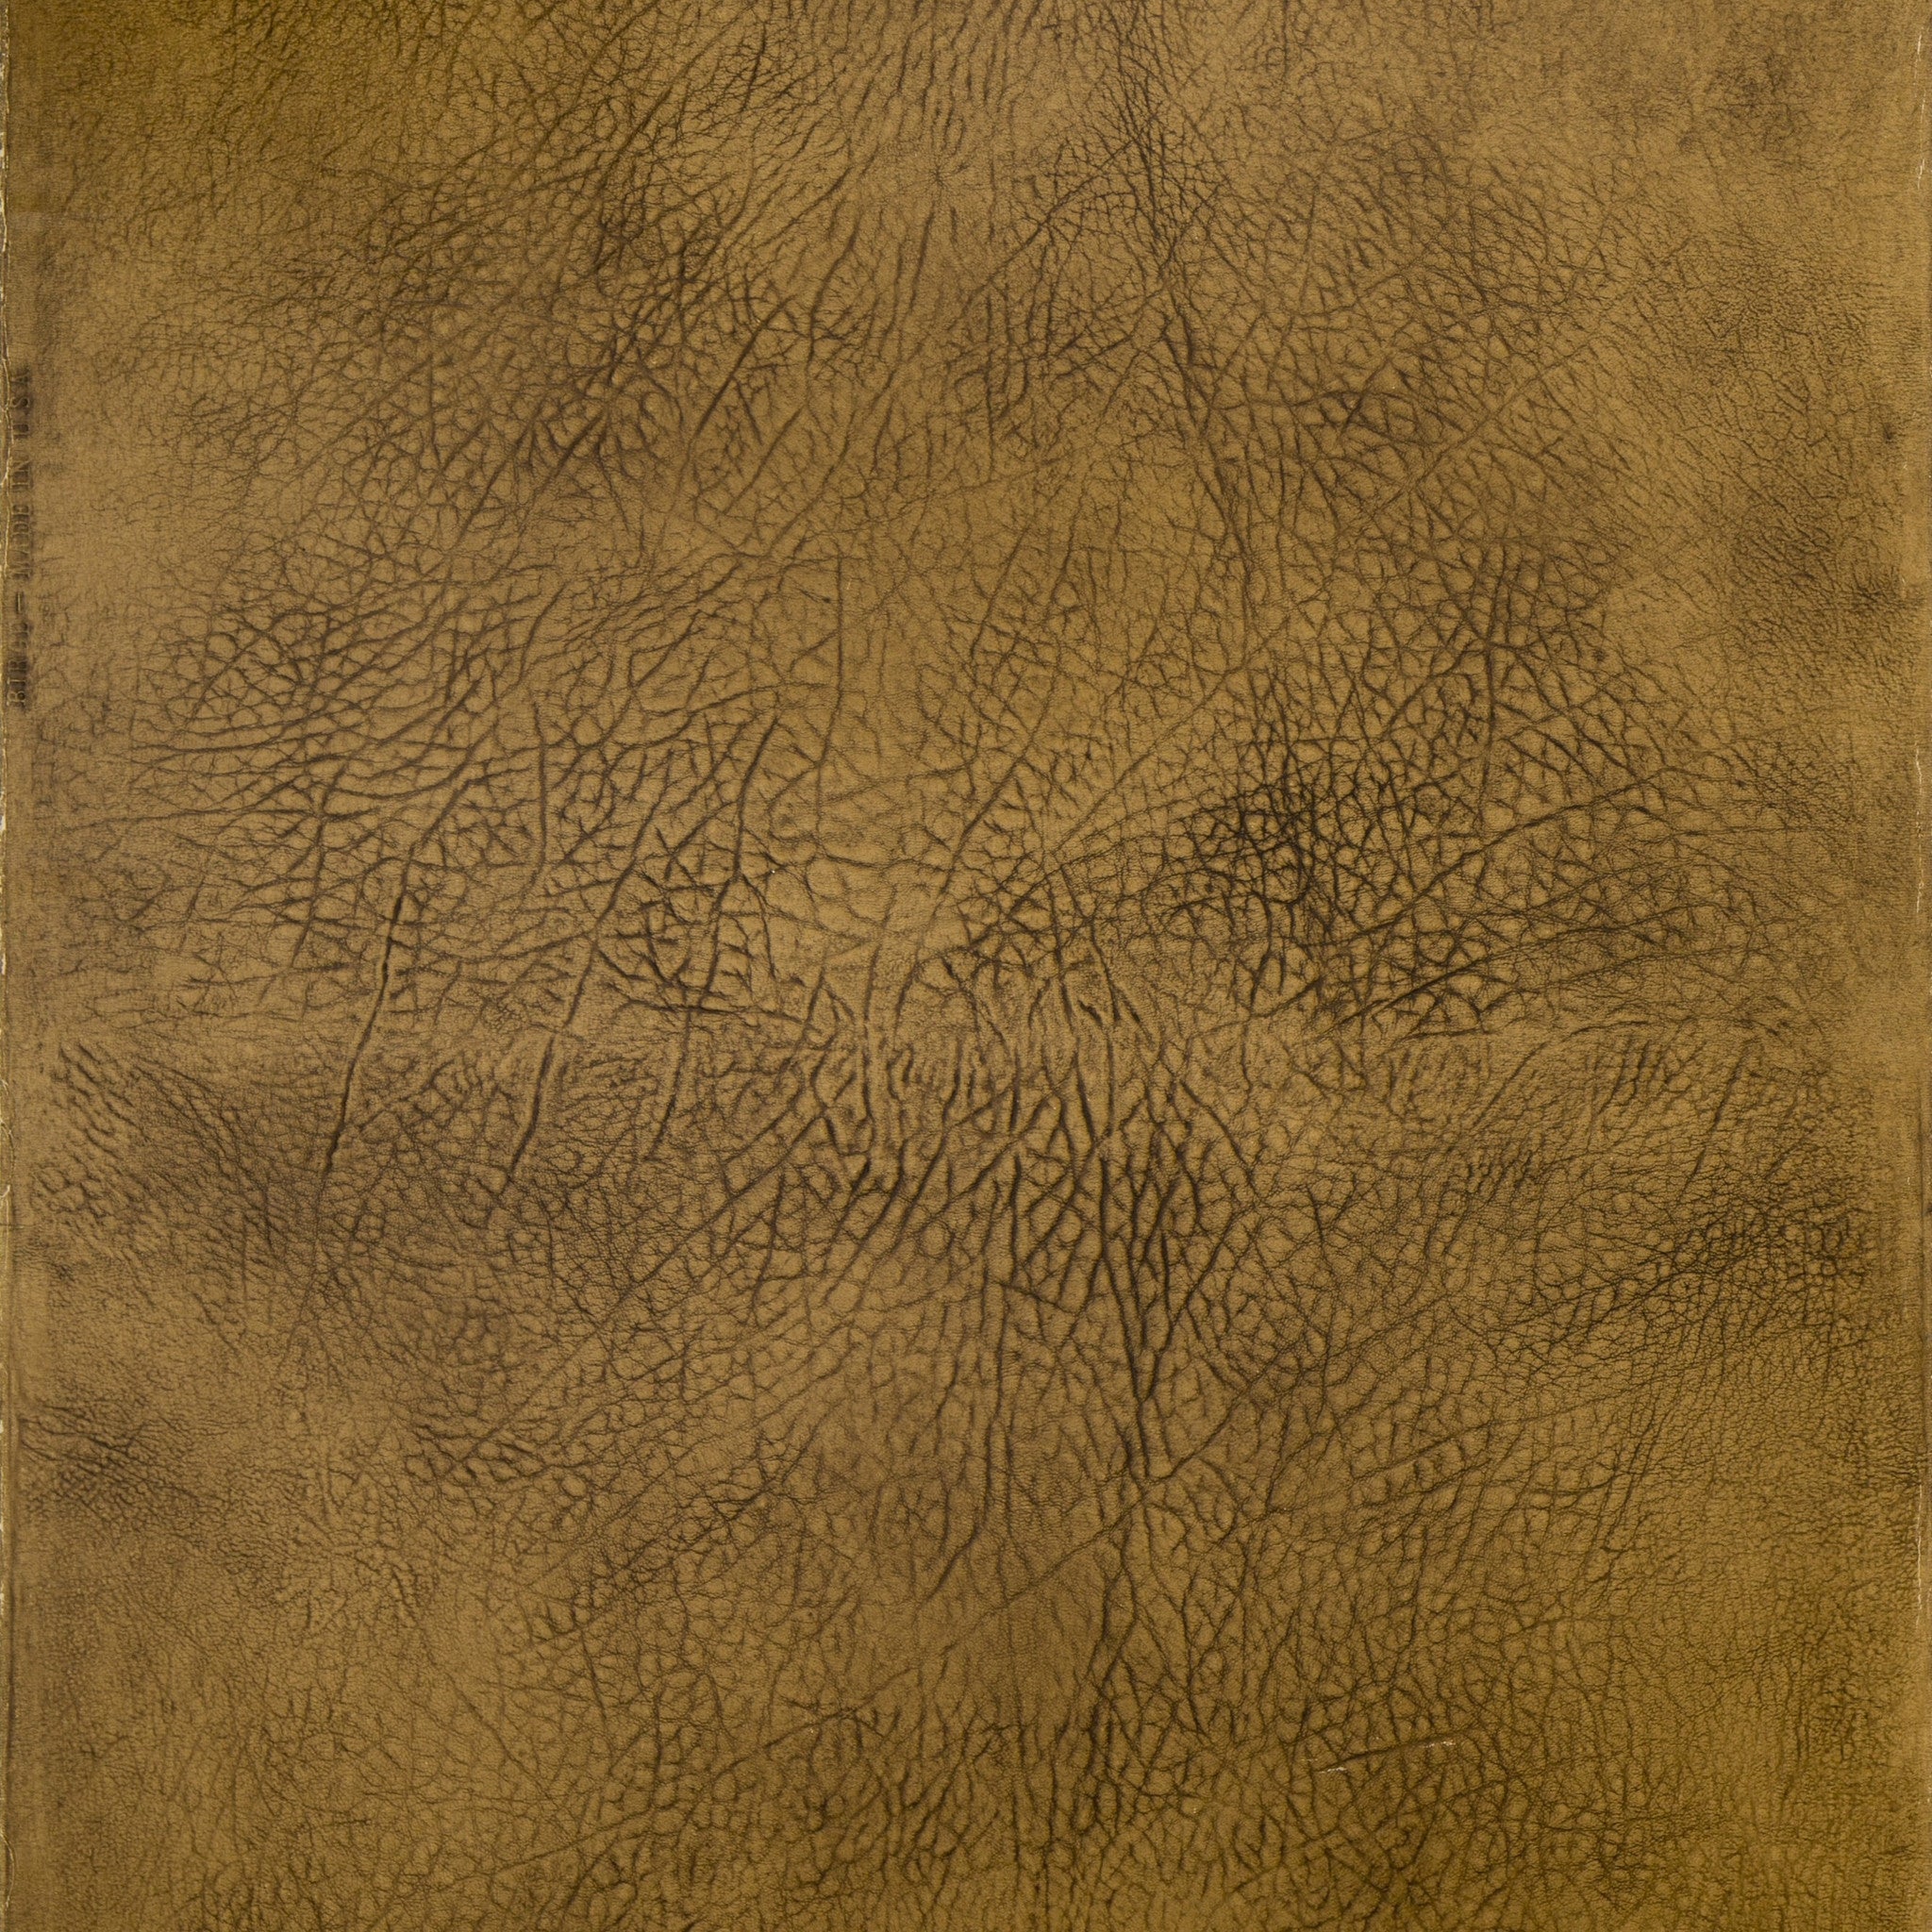 Vintage Full Size Leeather Embossed In Gold Photograph Album Stock Photo -  Download Image Now - iStock